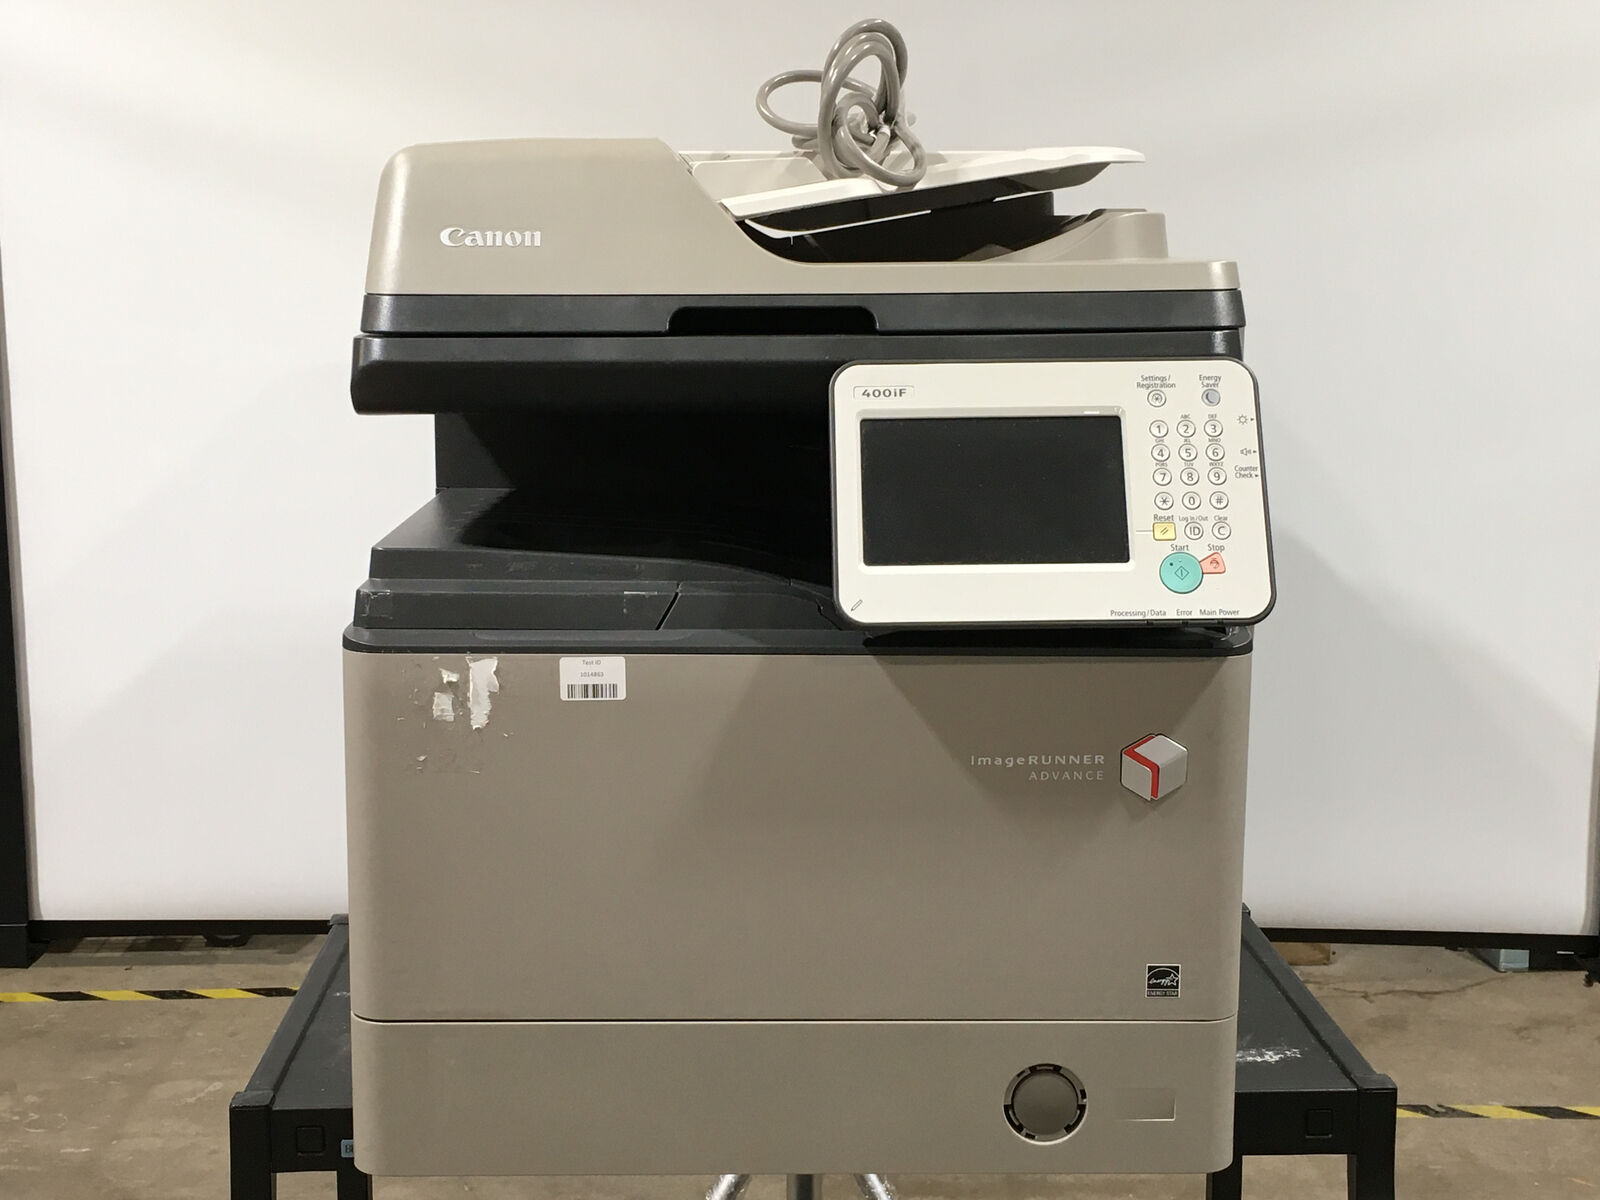 Canon ImageRunner Advance iR-ADV 400IF Copy/Print/Fax w/ 380k Pages and Toner